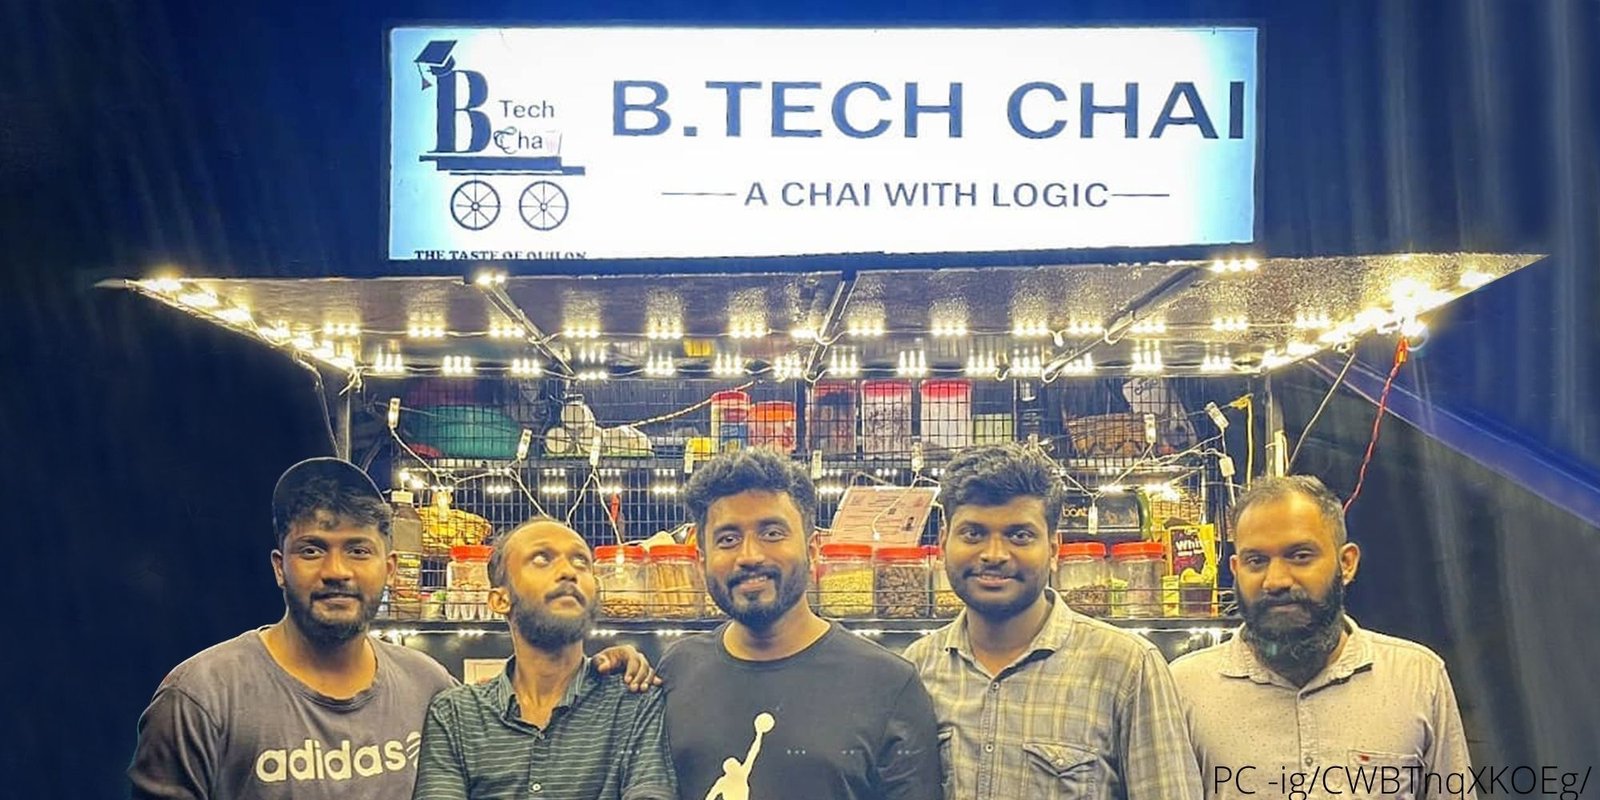 ‘B.Tech Chai’ Provides 50 Flavors Of Tea, Startup By Three Engineers From Kerela